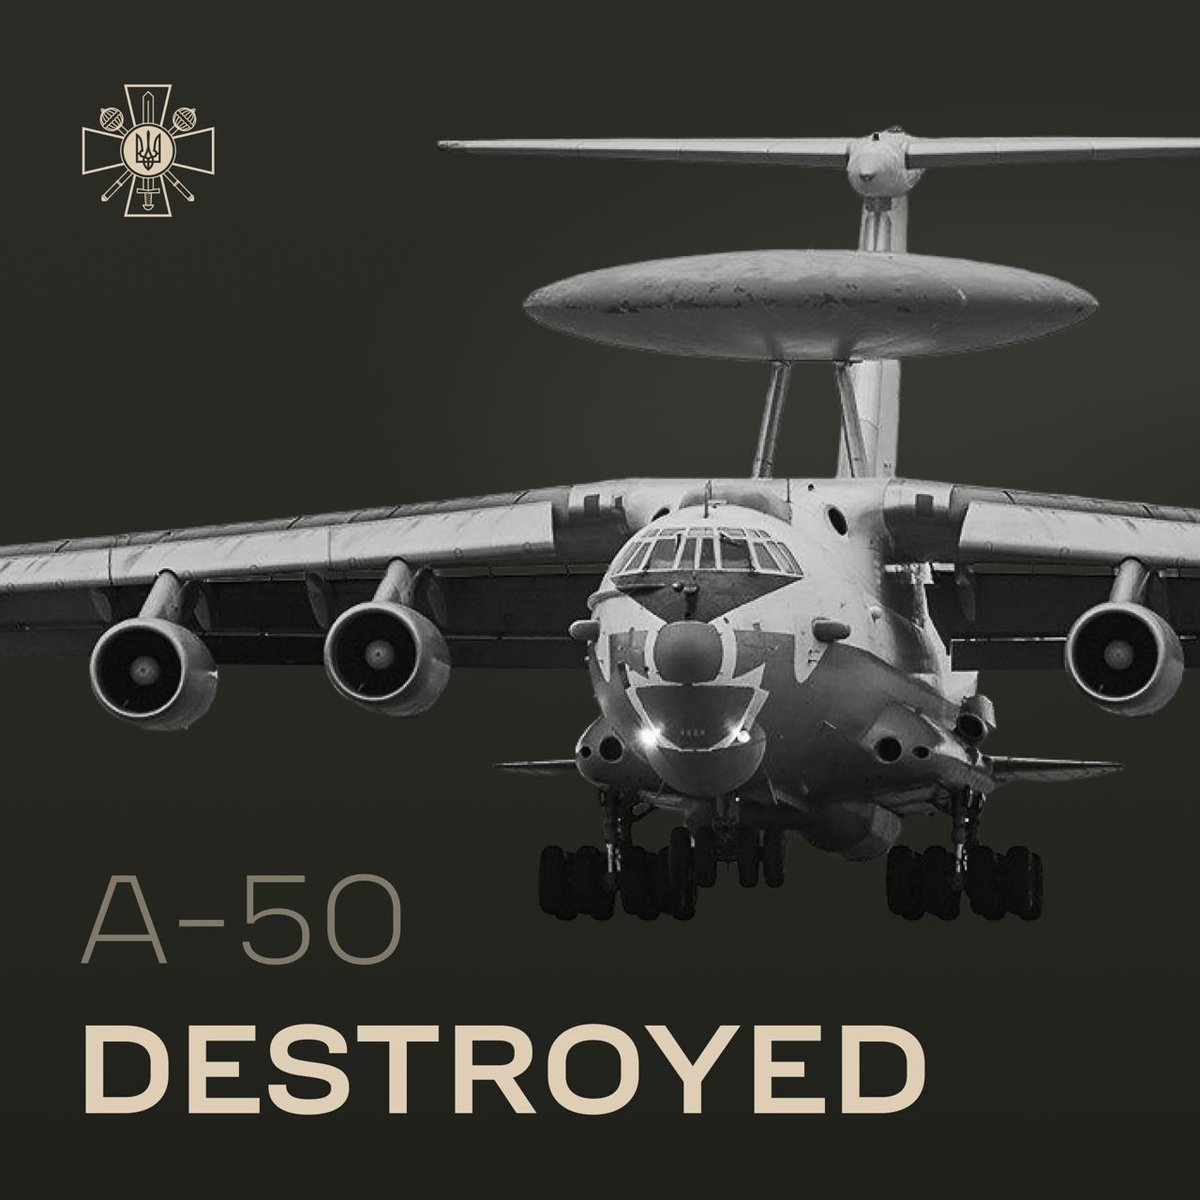 The Ukrainian Air Forces destroyed the enemy A-50 long-range radar detection and control aircraft, worth $330 million, and the Il-22 enemy air control center. Great job, warriors! Ukraine will win!